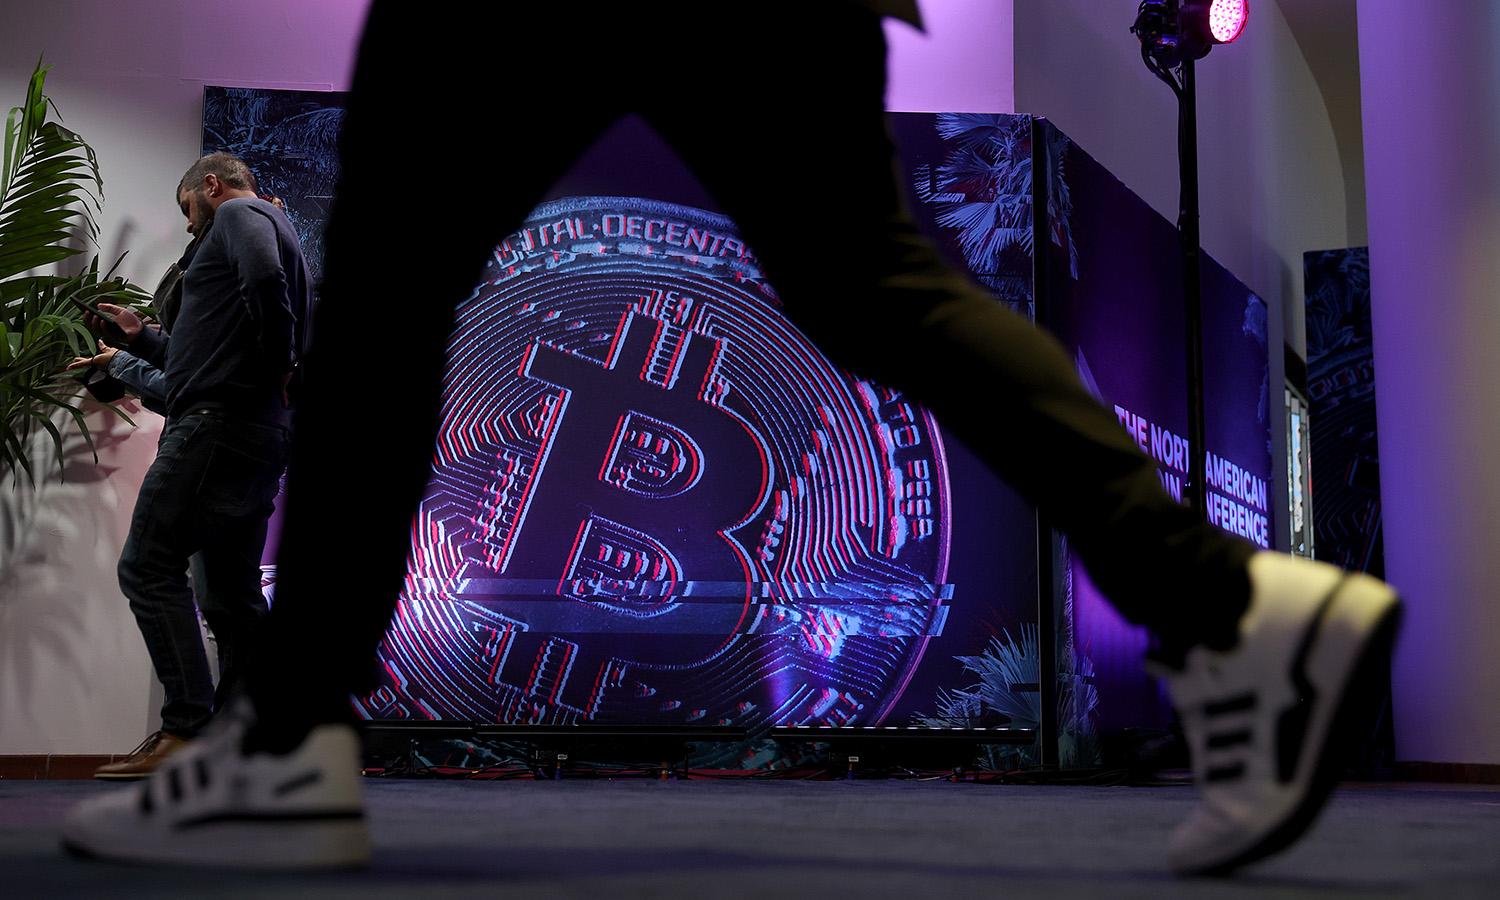 People walk through the North American Bitcoin Conference held at the James L Knight Center on Jan. 18, 2022, in Miami. The conference is a three-day event on Bitcoin, NFTs, the metaverse, Defi, DAOs, stablecoins, blockchain and more. (Photo by Joe Raedle/Getty Images)